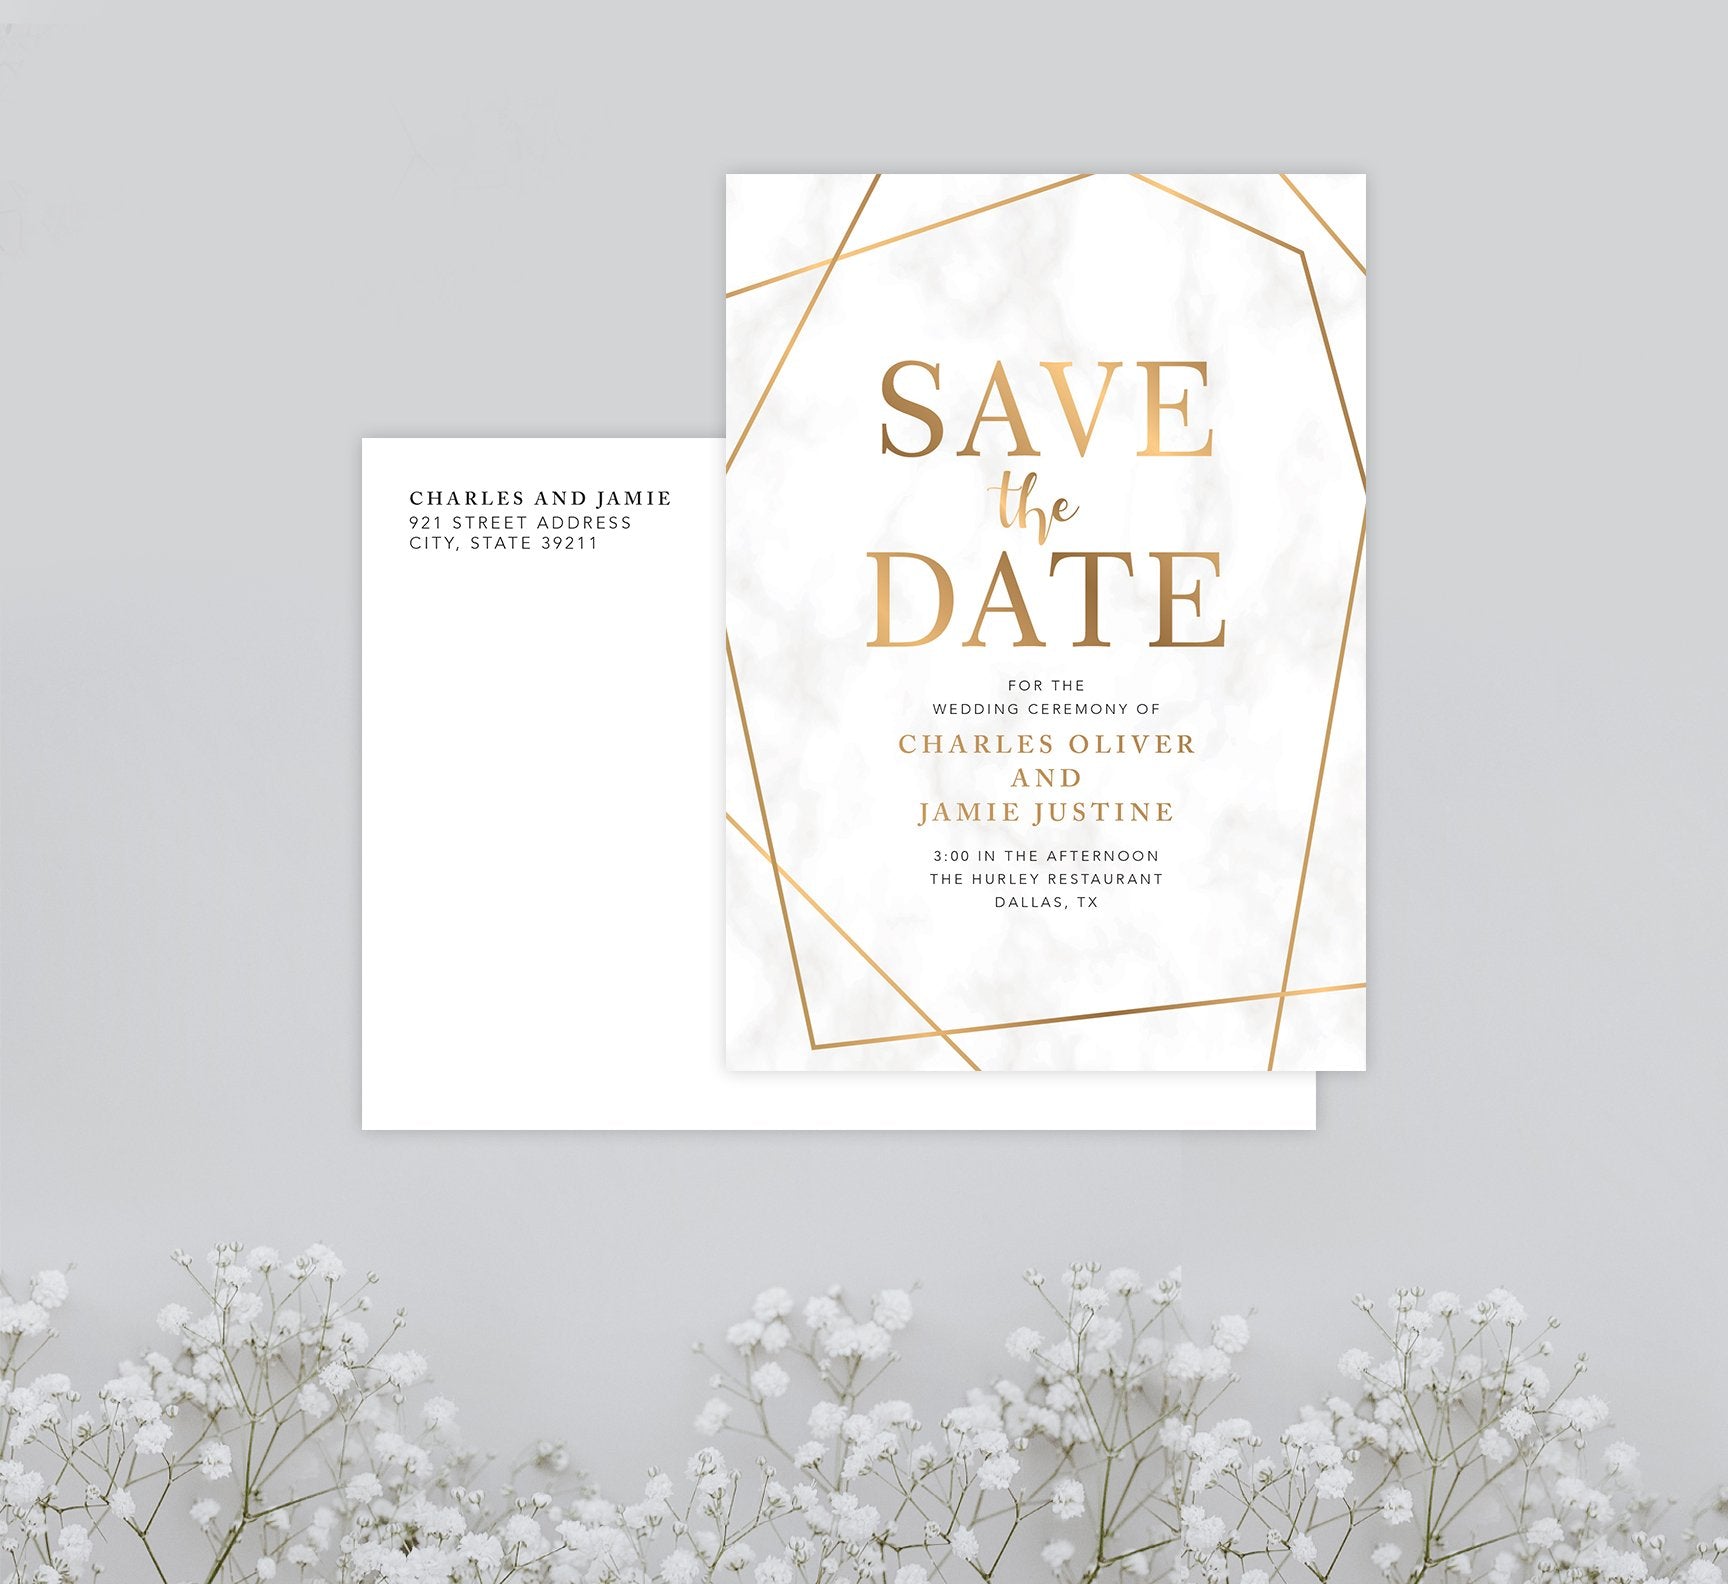 Precious Marble Save the Date Card Mockup